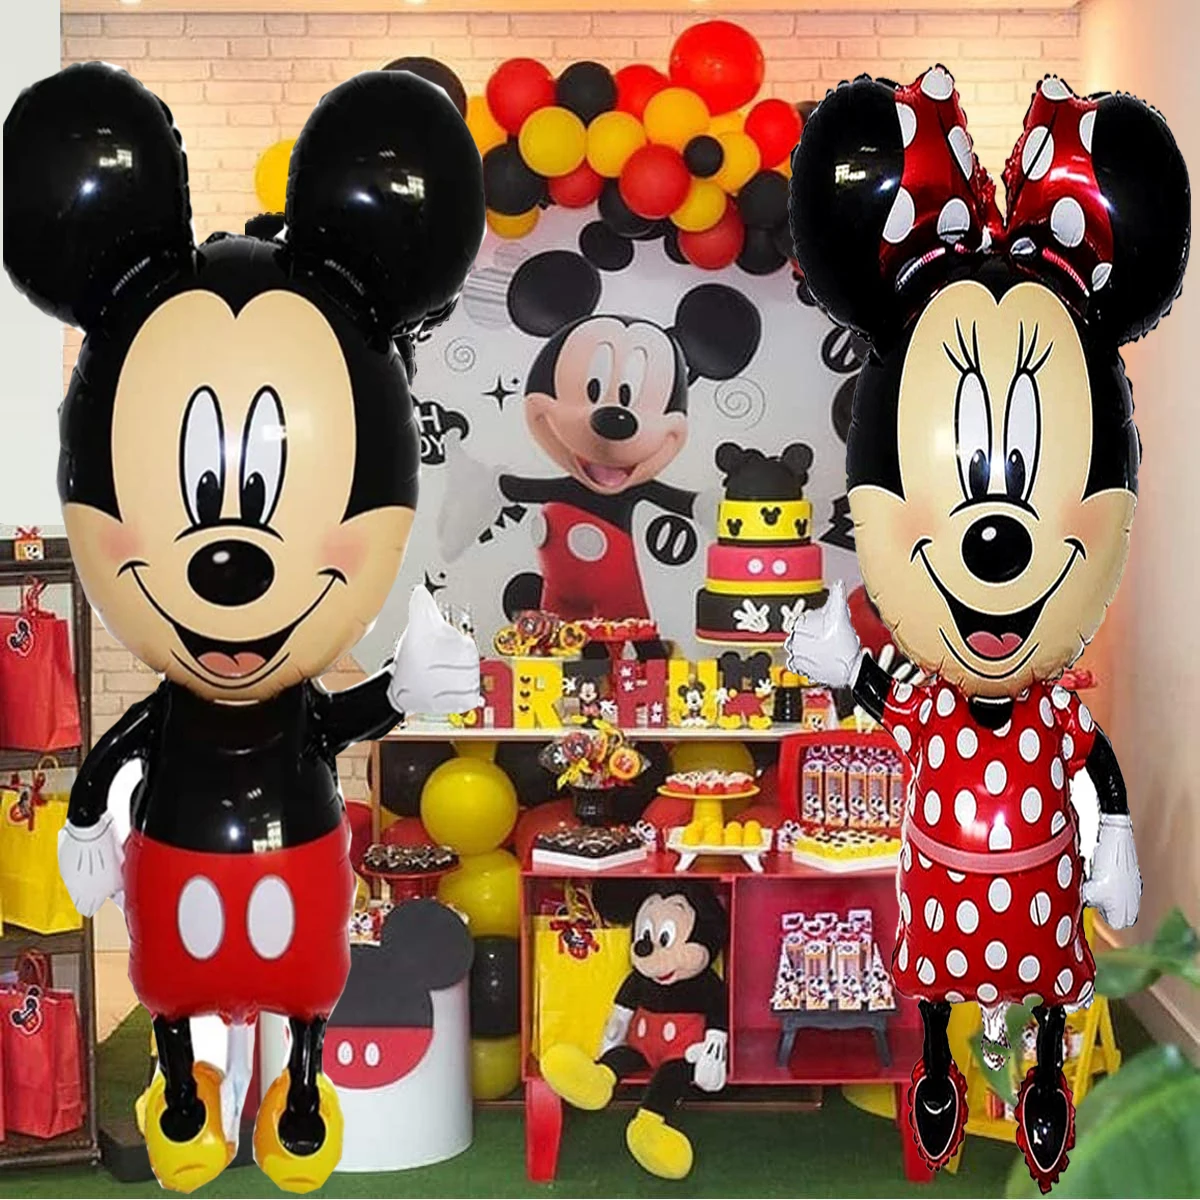 

Disney Giant Mickey Minnie Mouse Frozen Standing Cartoon Foil Balloon Birthday Party puzzle Dolls Decorations kids Gift toys